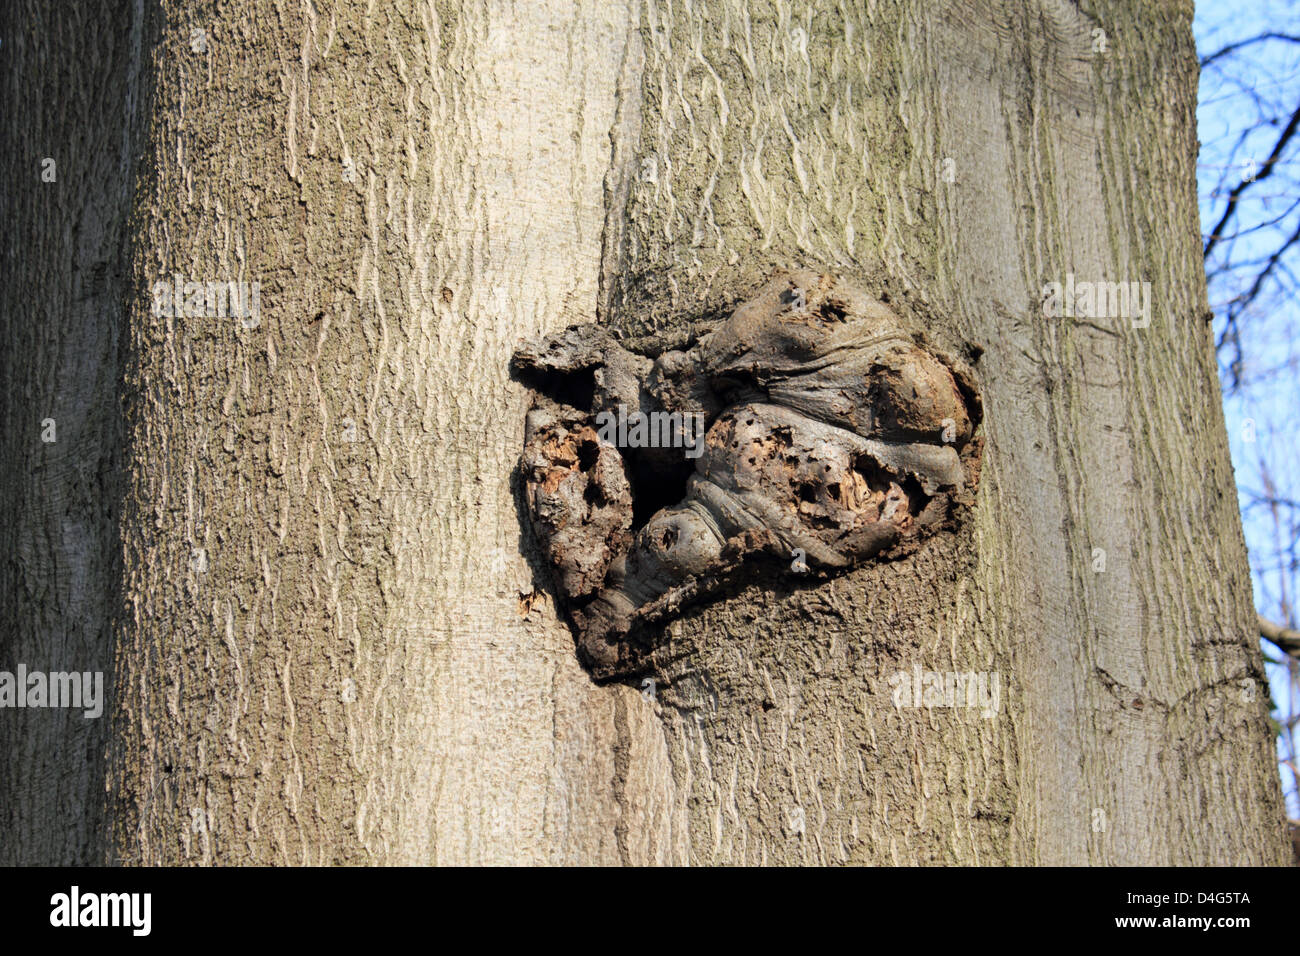 Unusual growth on beech tree trunk looks like a monster escaping. Surrey England UK Stock Photo